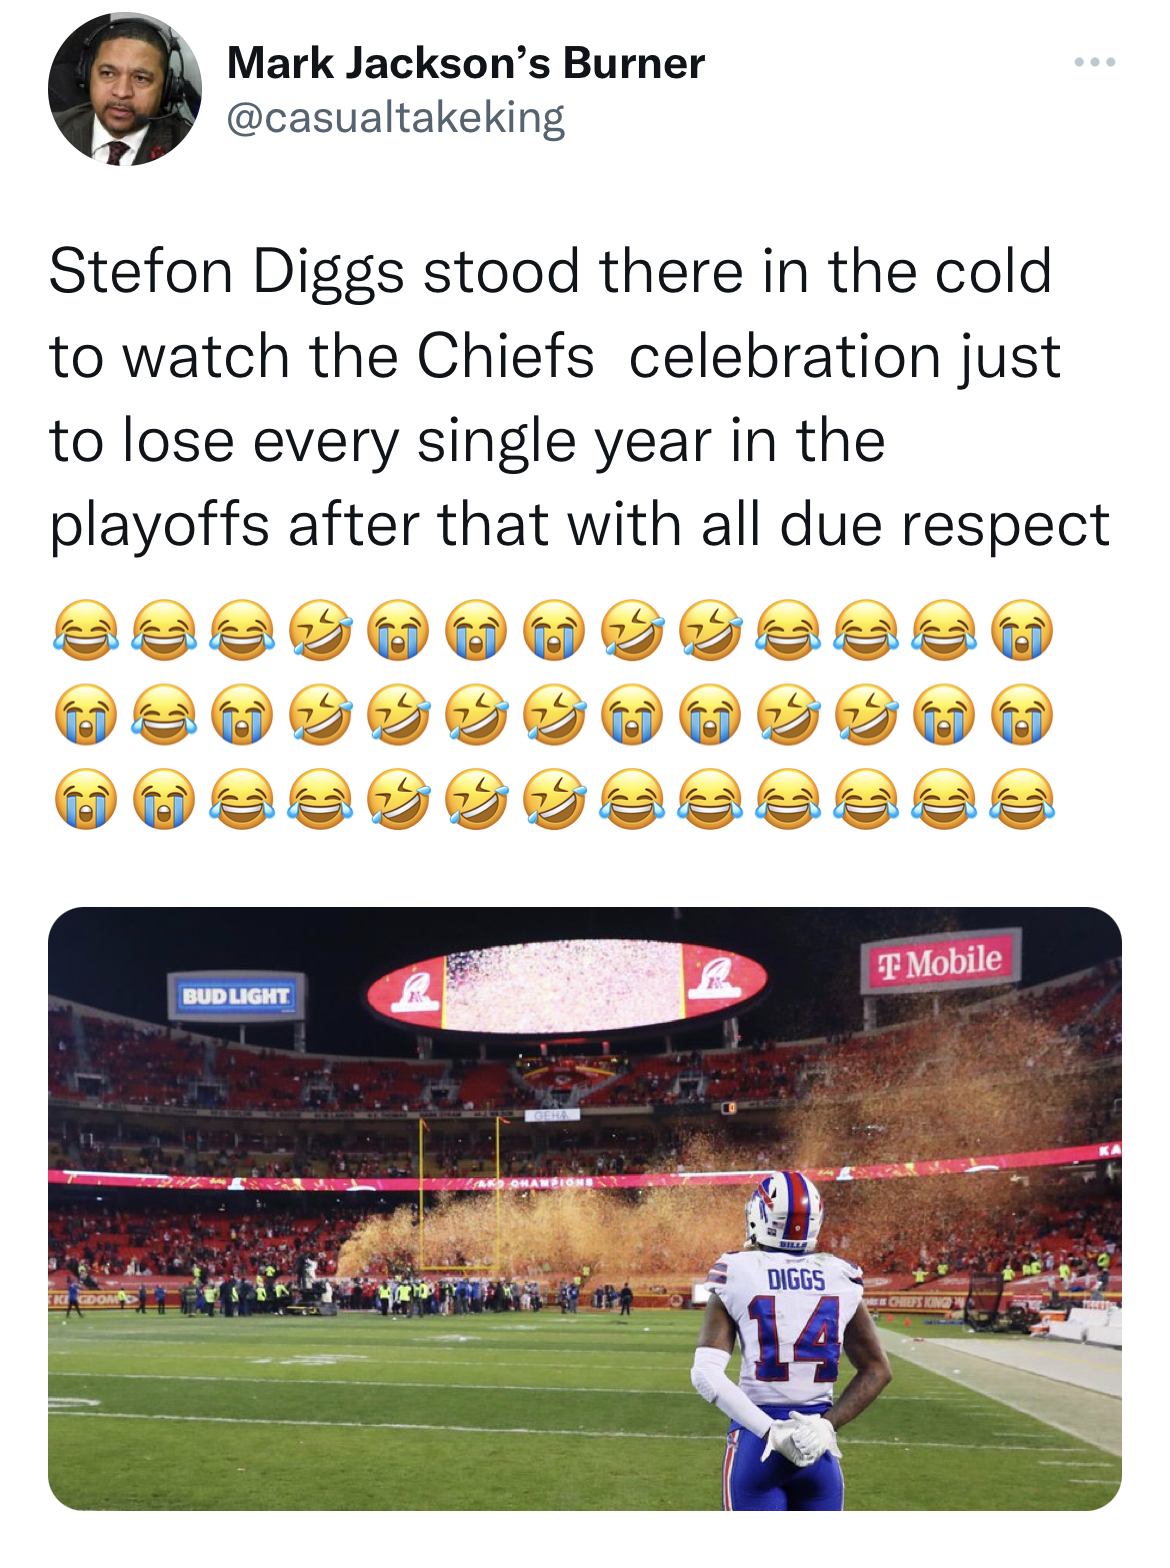 tweets dunking on celebs - player - Mark Jackson's Burner Stefon Diggs stood there in the cold to watch the Chiefs celebration just to lose every single year in the playoffs after that with all due respect Budlight Diggs 14 Mobile